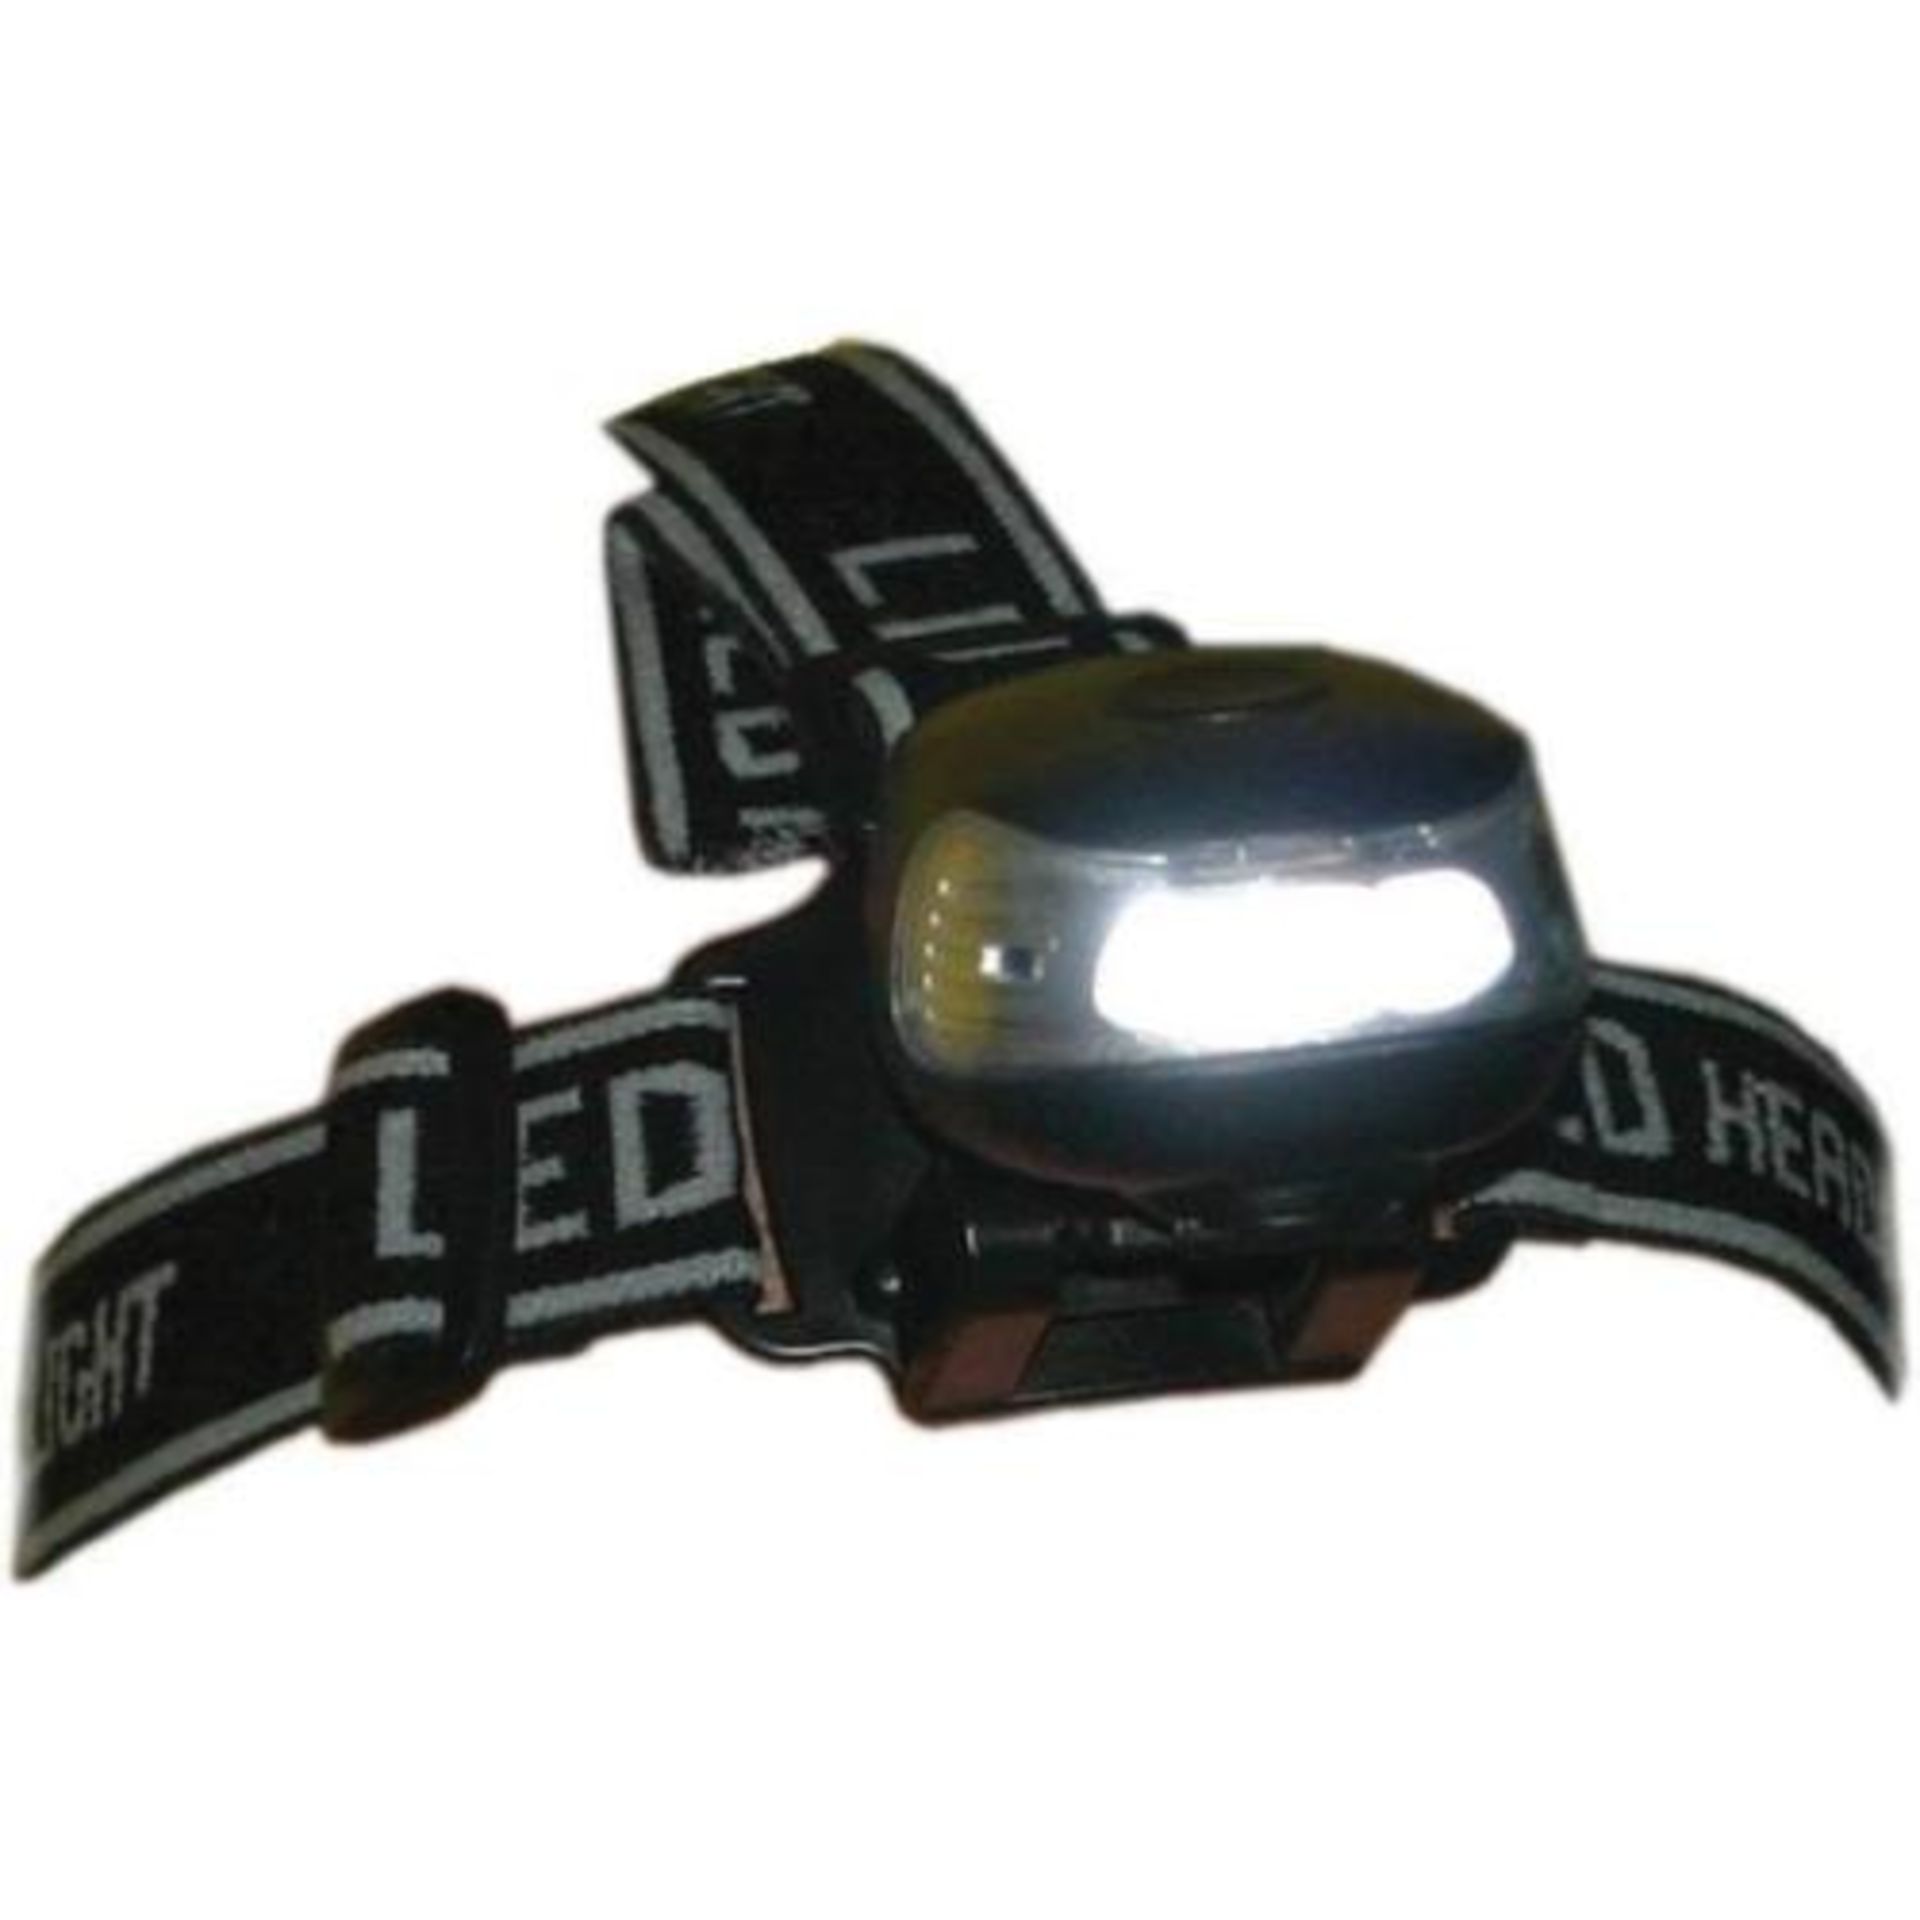 V Tritronic Optimax LED Headlamp with elastic strap and 3 leds / flasing red SRP 19.99